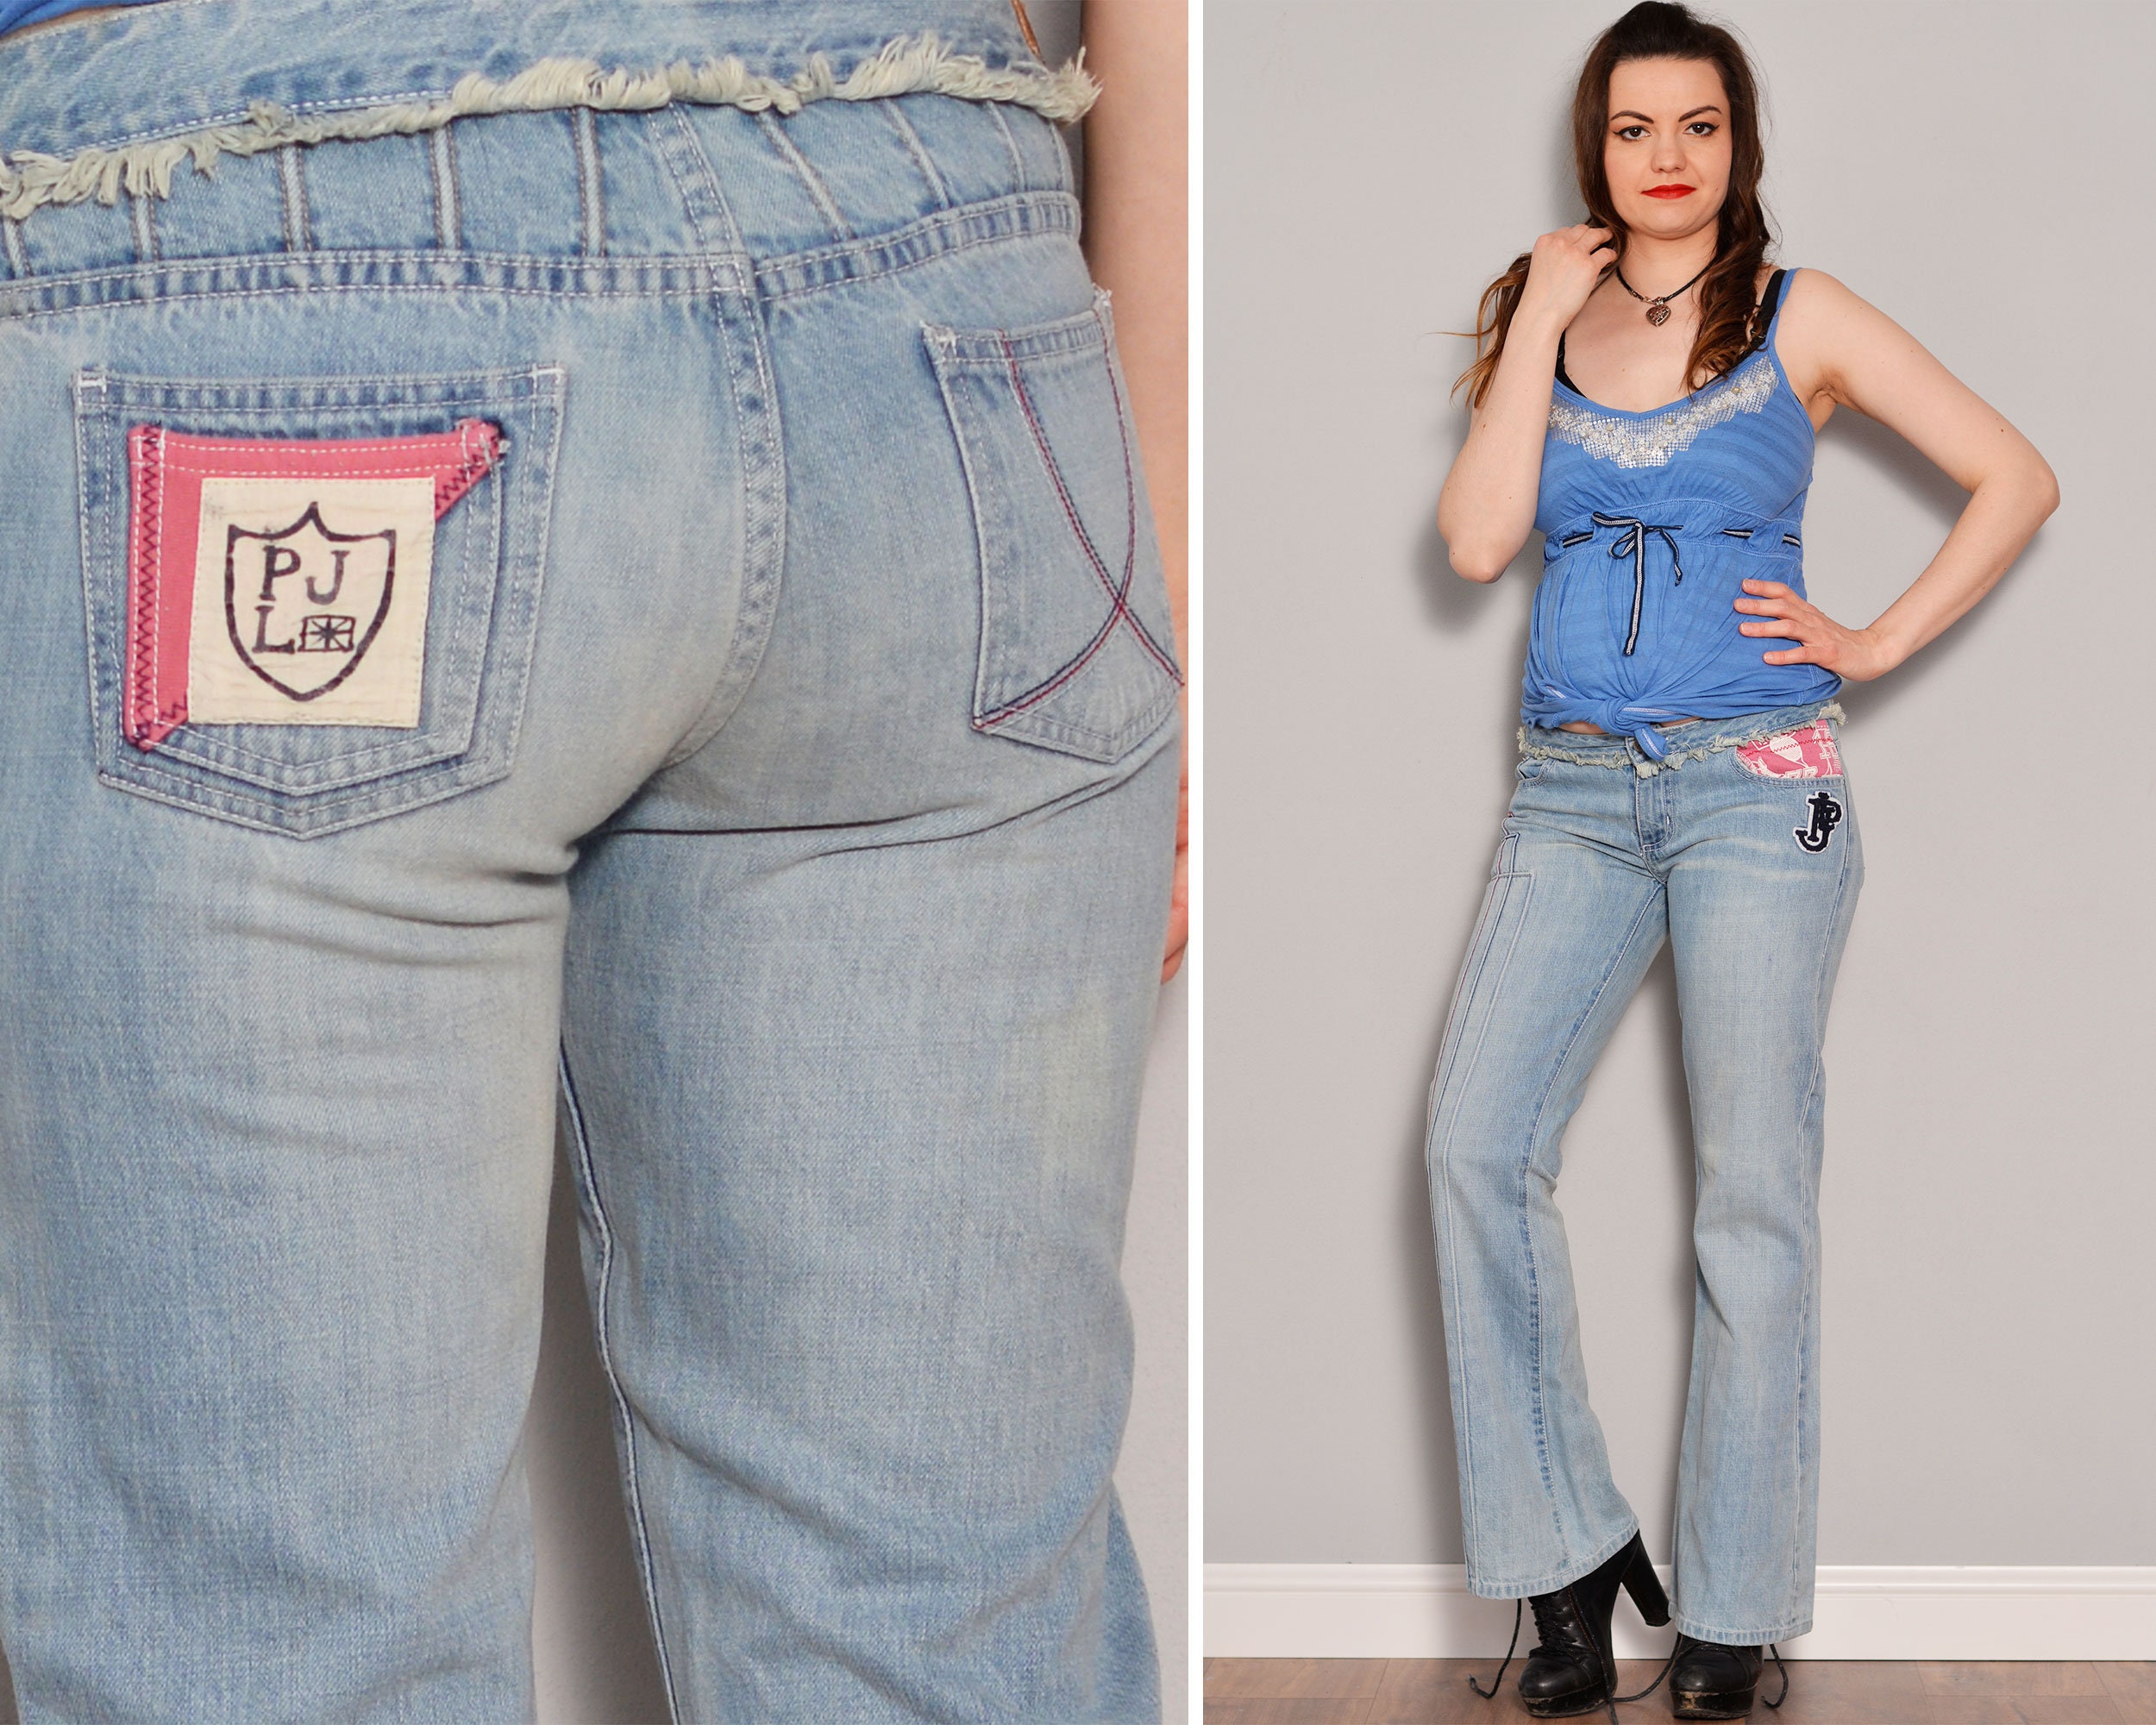 Jeans Waistline Denim Jeans Stitch Hippie Bell Flared 10 Bellbottoms Pattern Pepe - Wash Size Bottom Light Striped Patches 8 Israel to Frayed Etsy